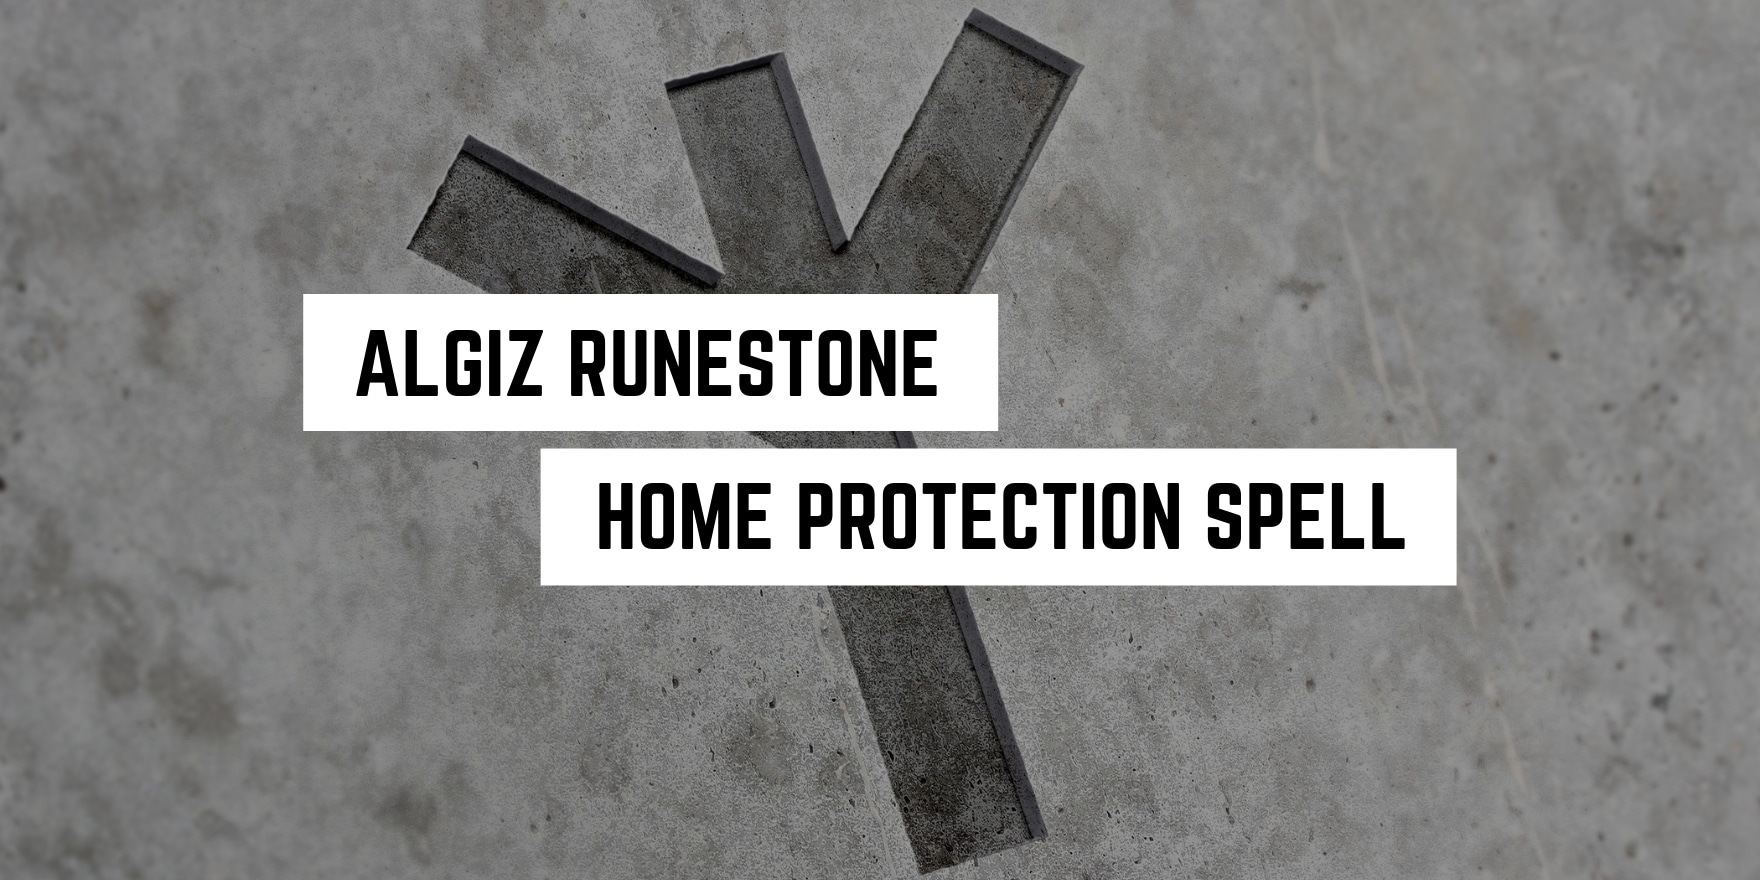 Symbolic algiz runestone representing a home protection spell on a textured background, available at a metaphysical shop.